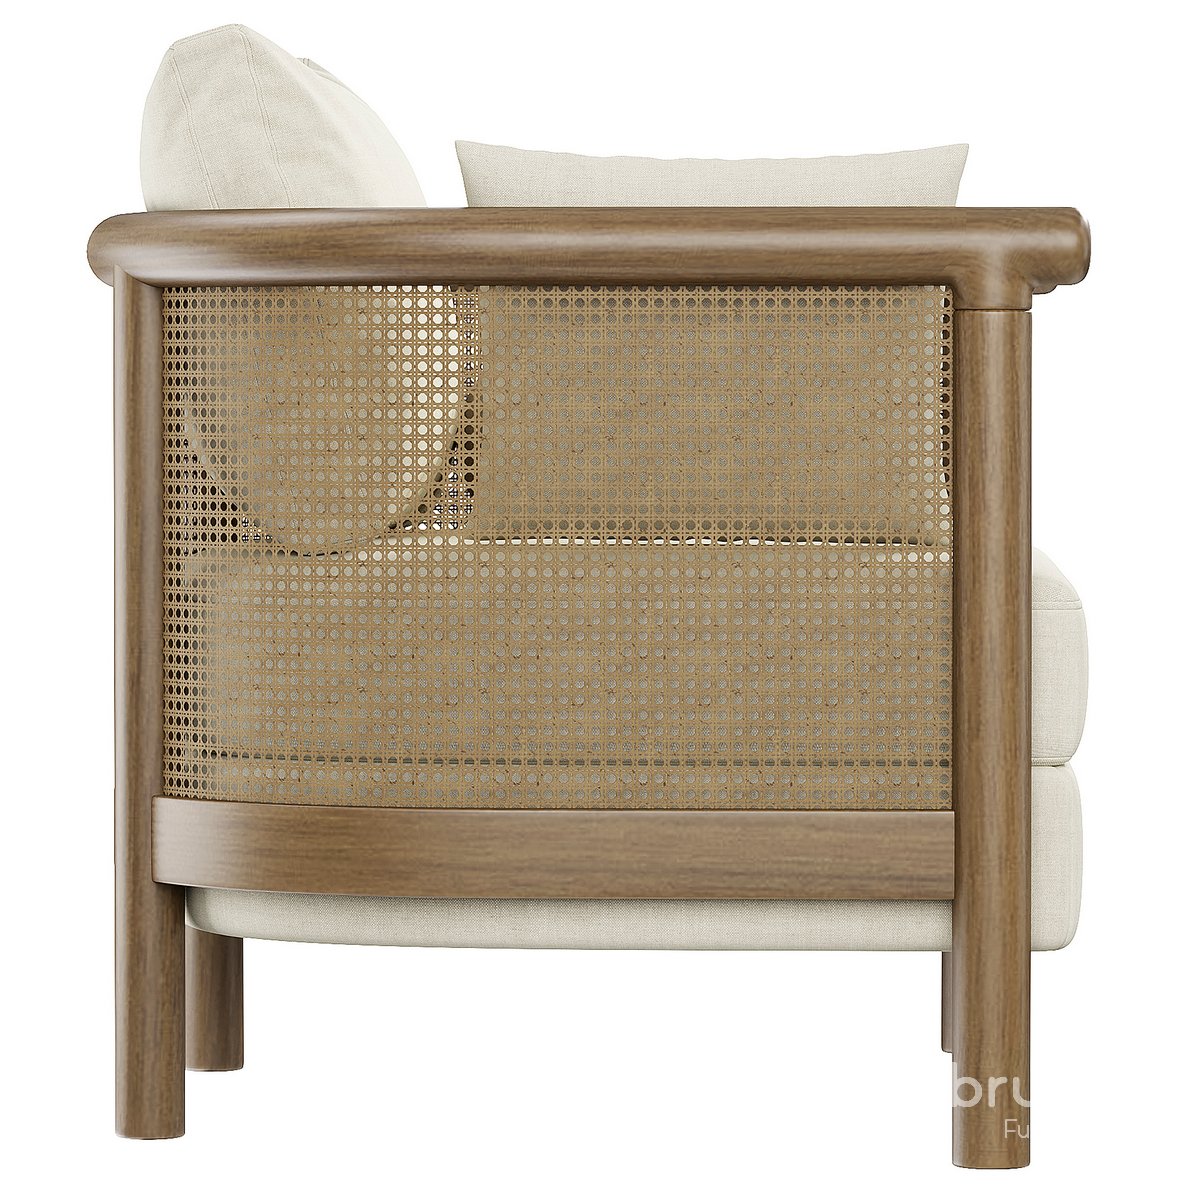 Soho Home Sydney Cane Armchair, Washed Linen Flax, US